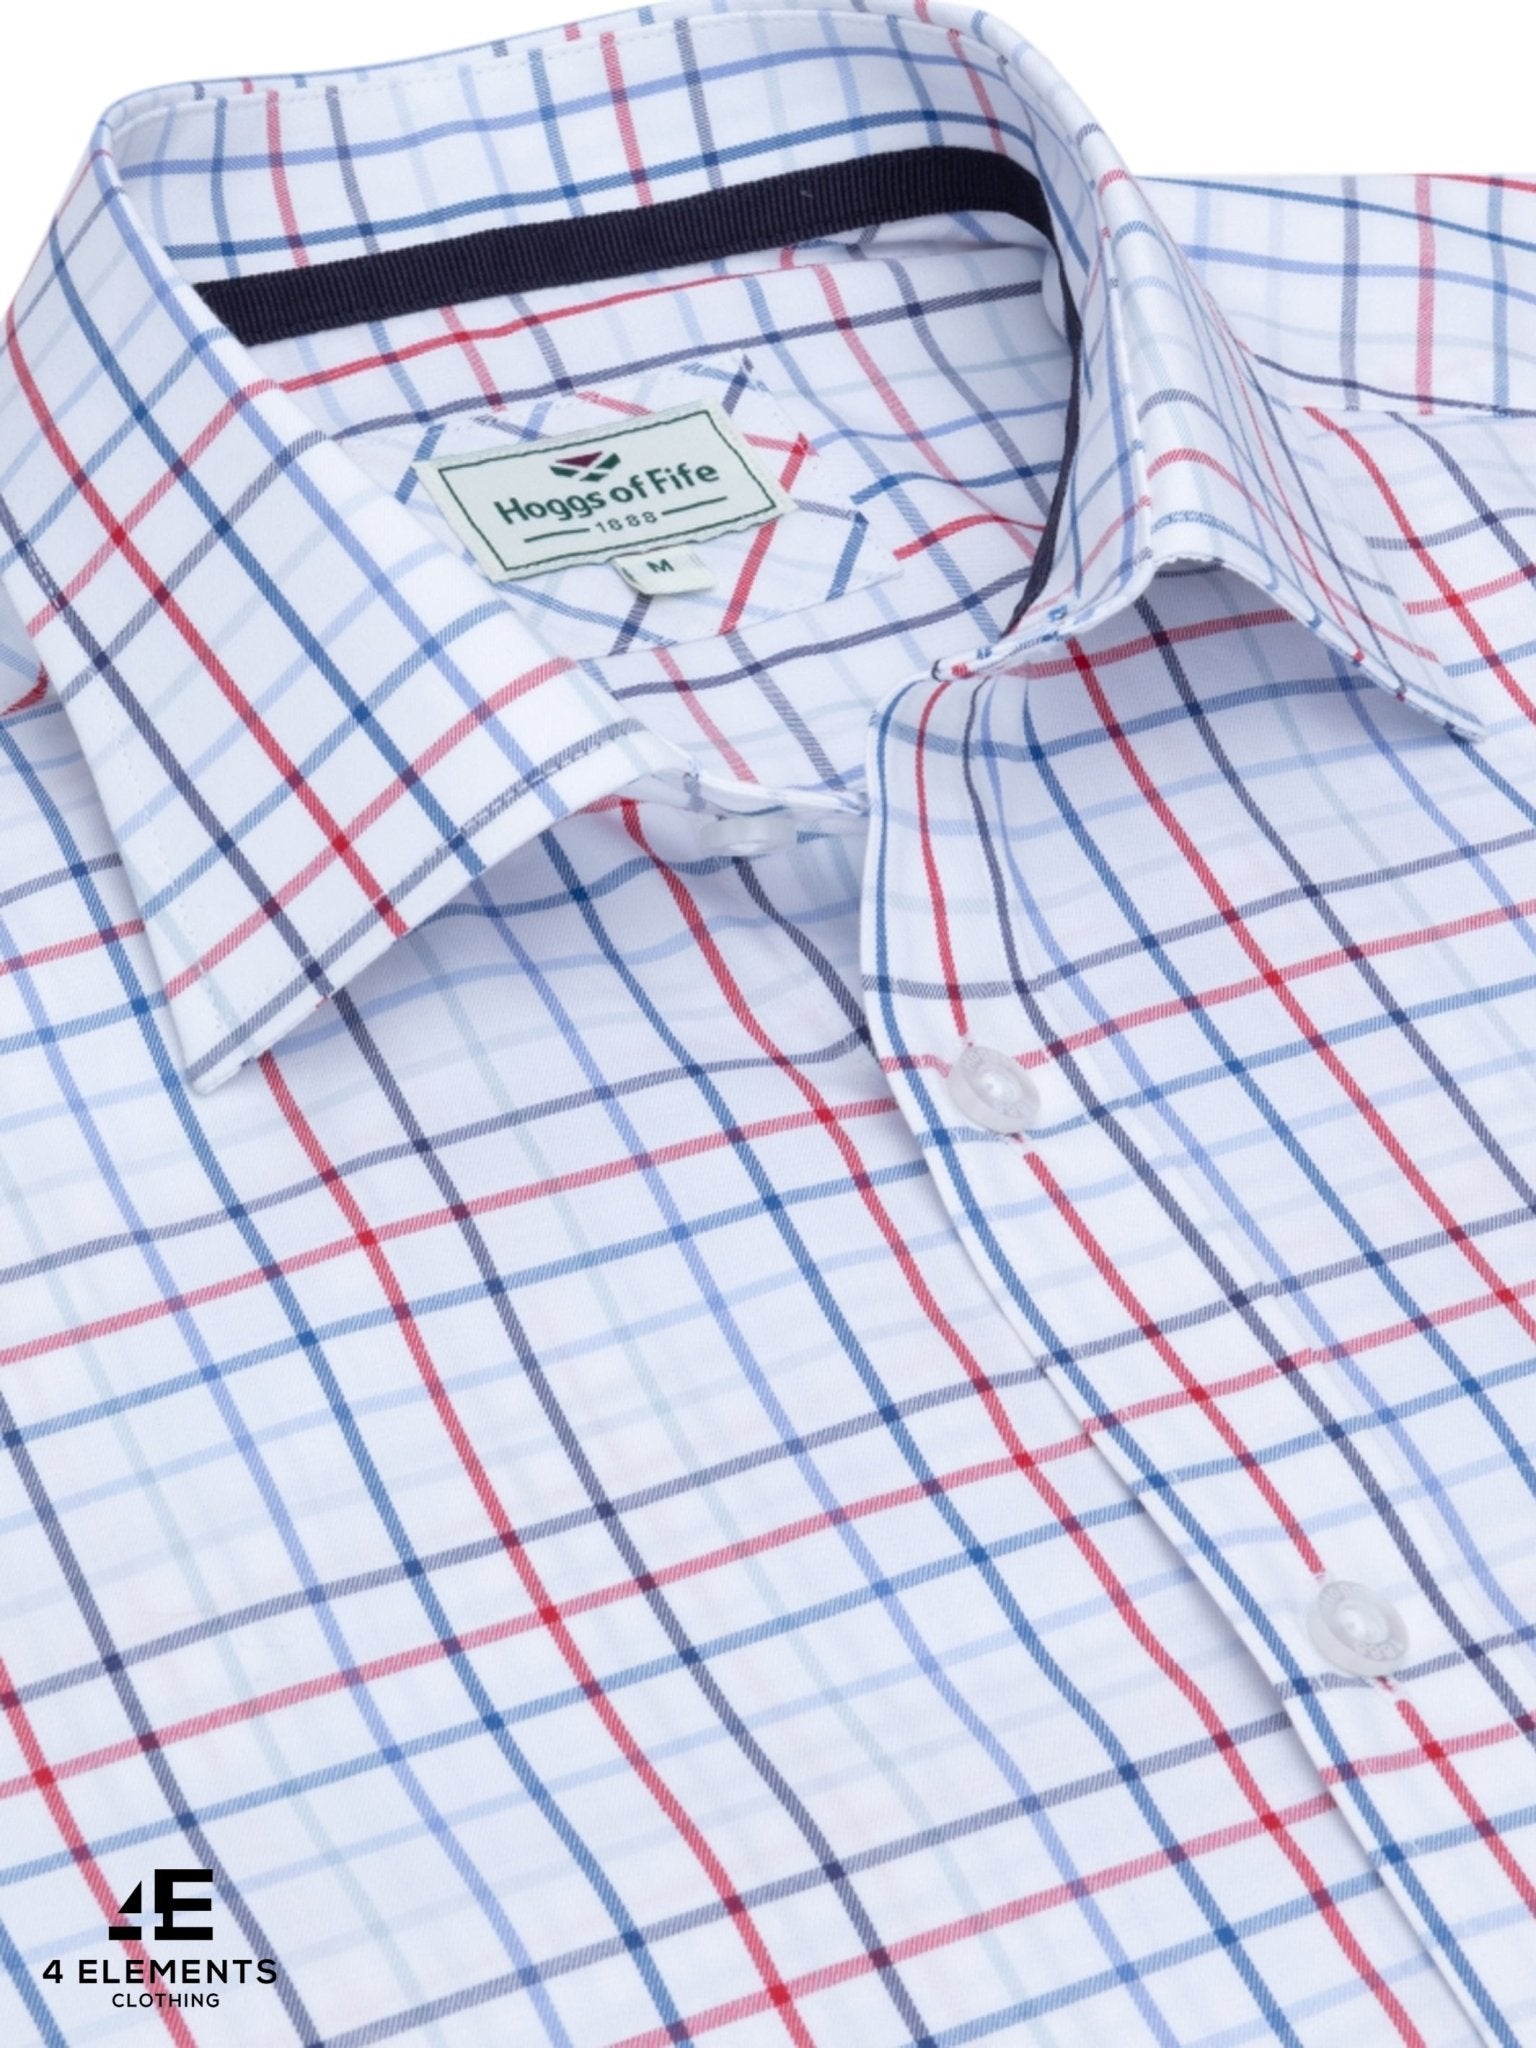 4elementsclothingHoggs of FifeHoggs of Fife - Turnberry Mens Shirt Twill CottonShirtTURN/RN/1